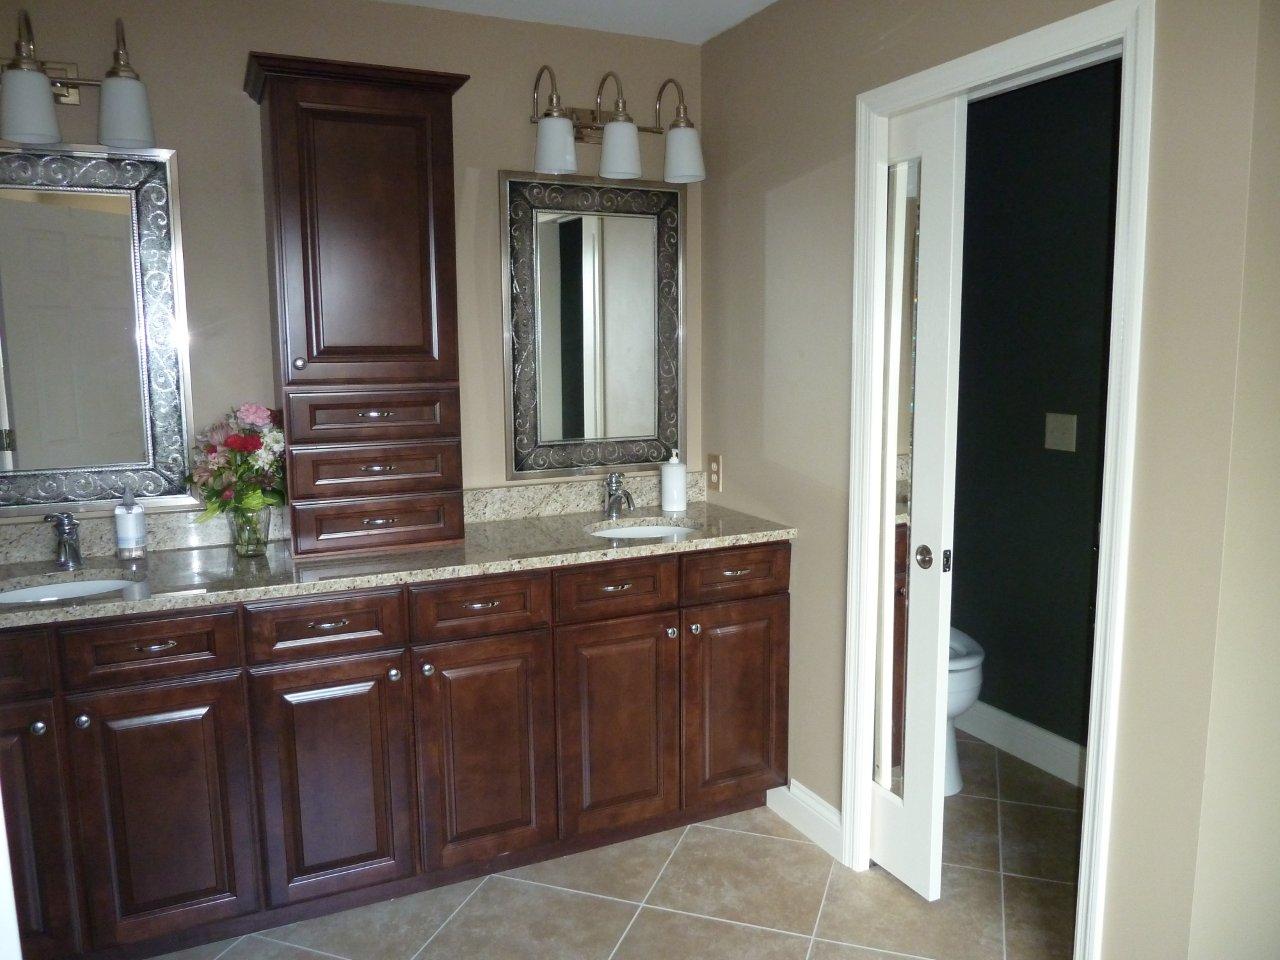 Master Bath Remodeling Examples - Terbrock Construction